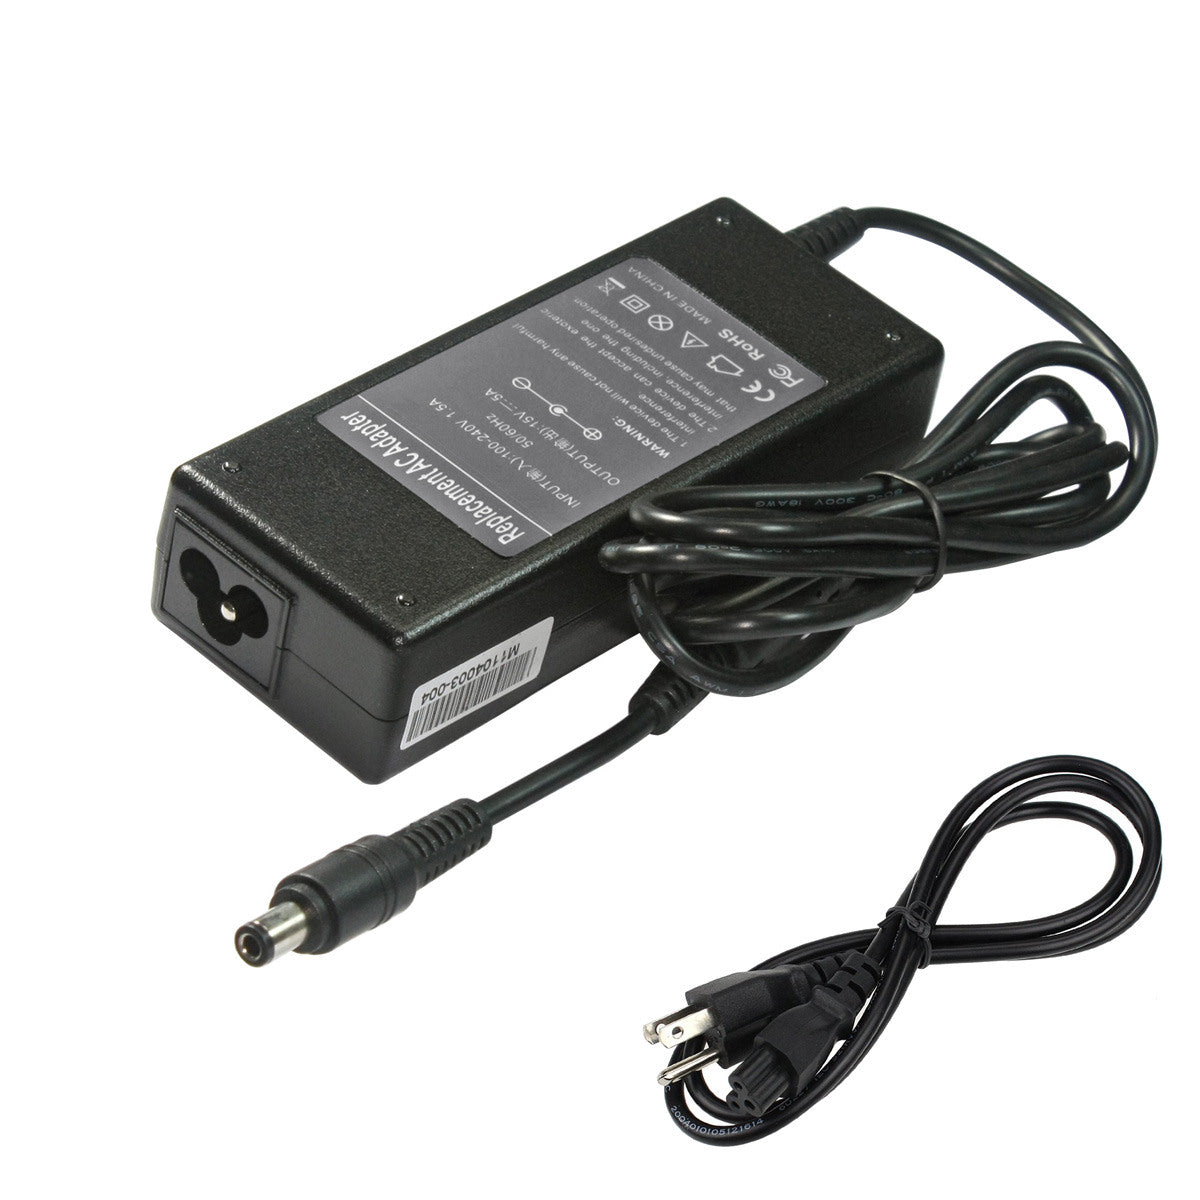 Compatible Replacement Toshiba Satellite PS221U-490J08 Laptop Charger.